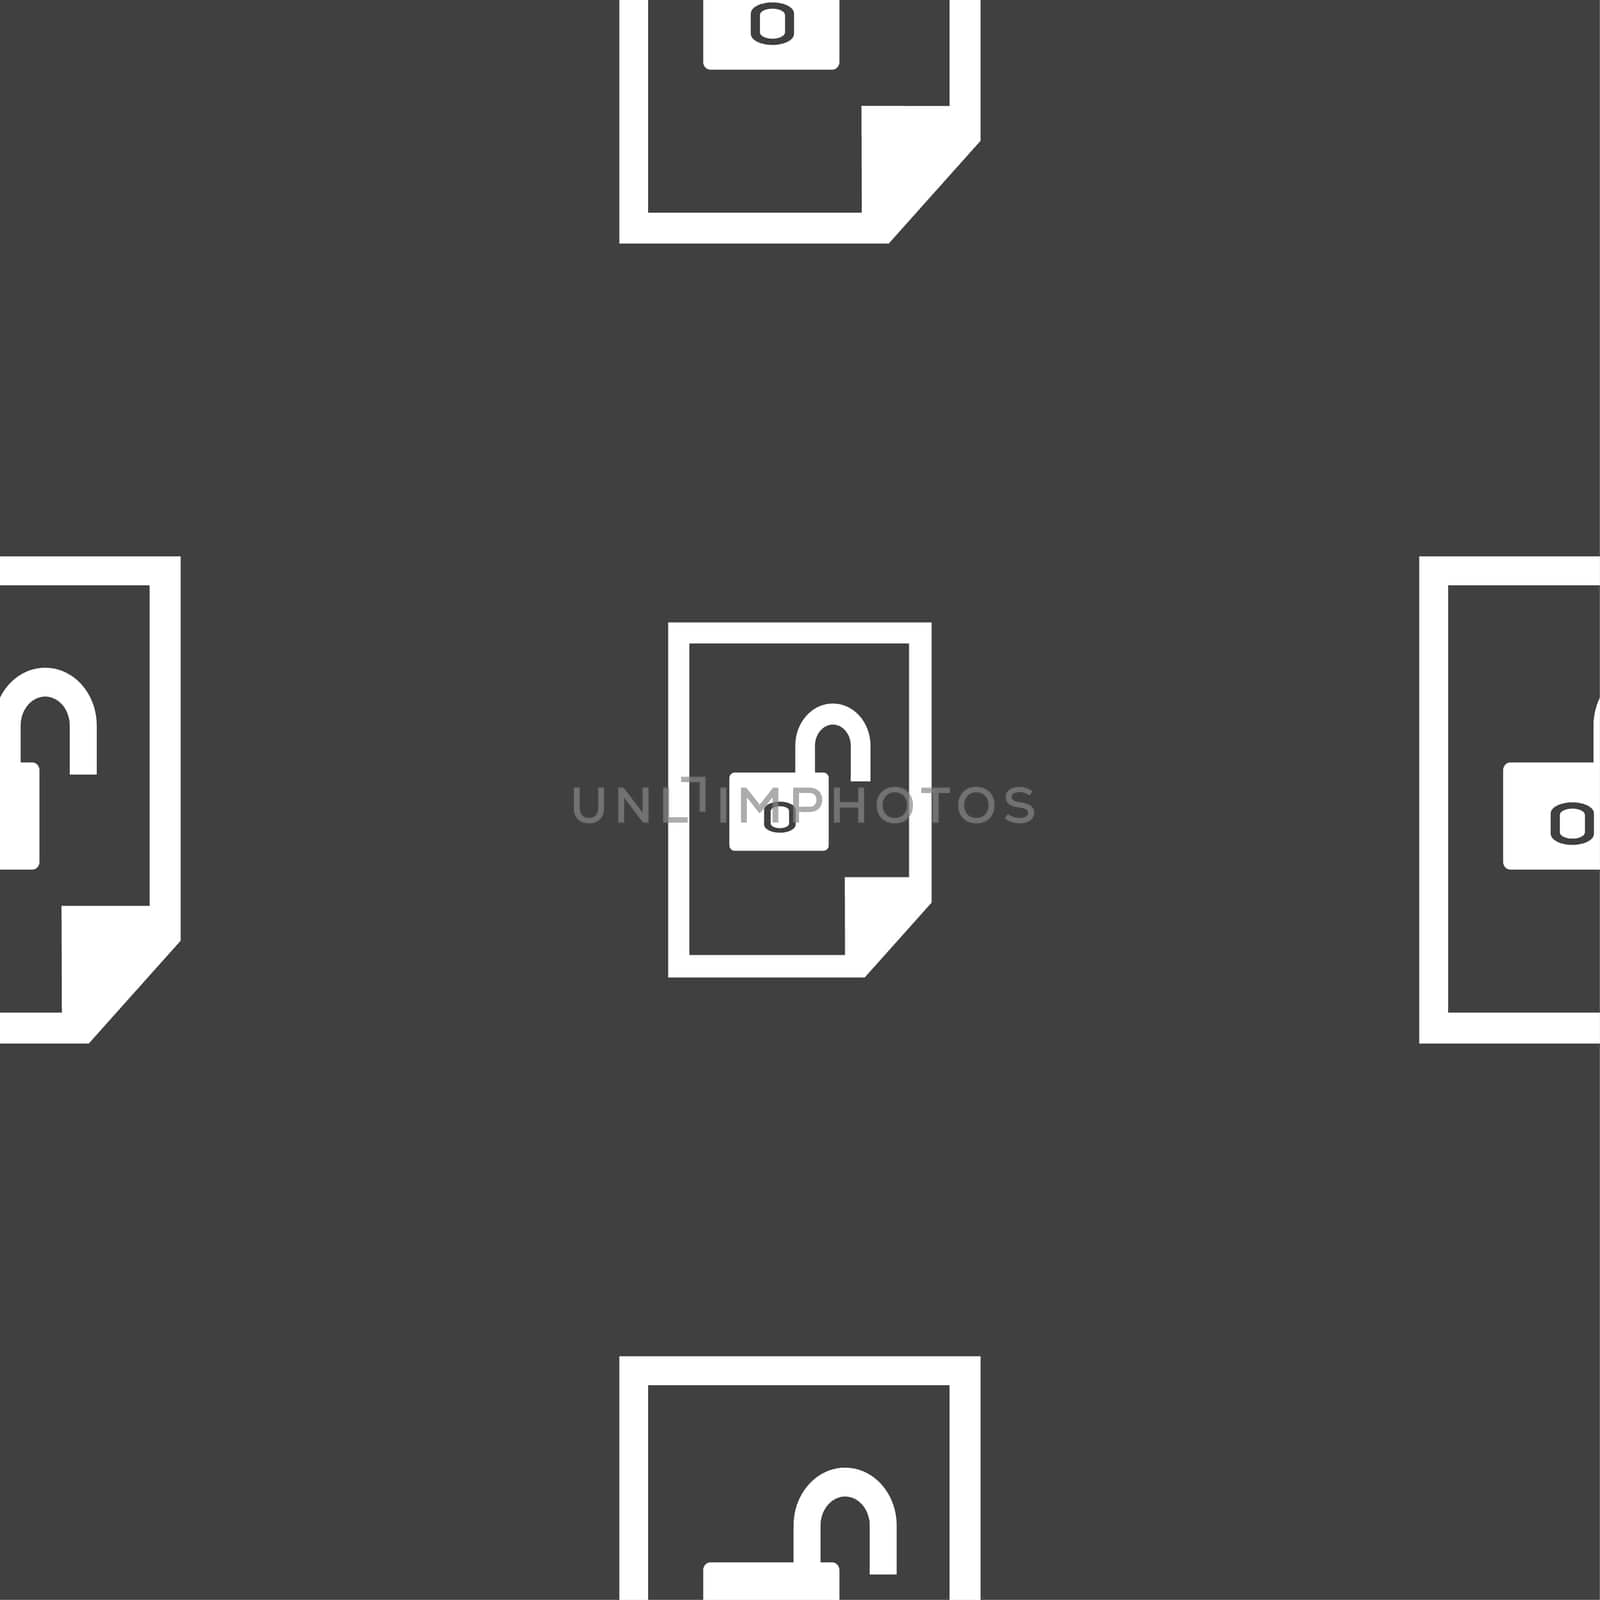 File unlocked icon sign. Seamless pattern on a gray background. illustration